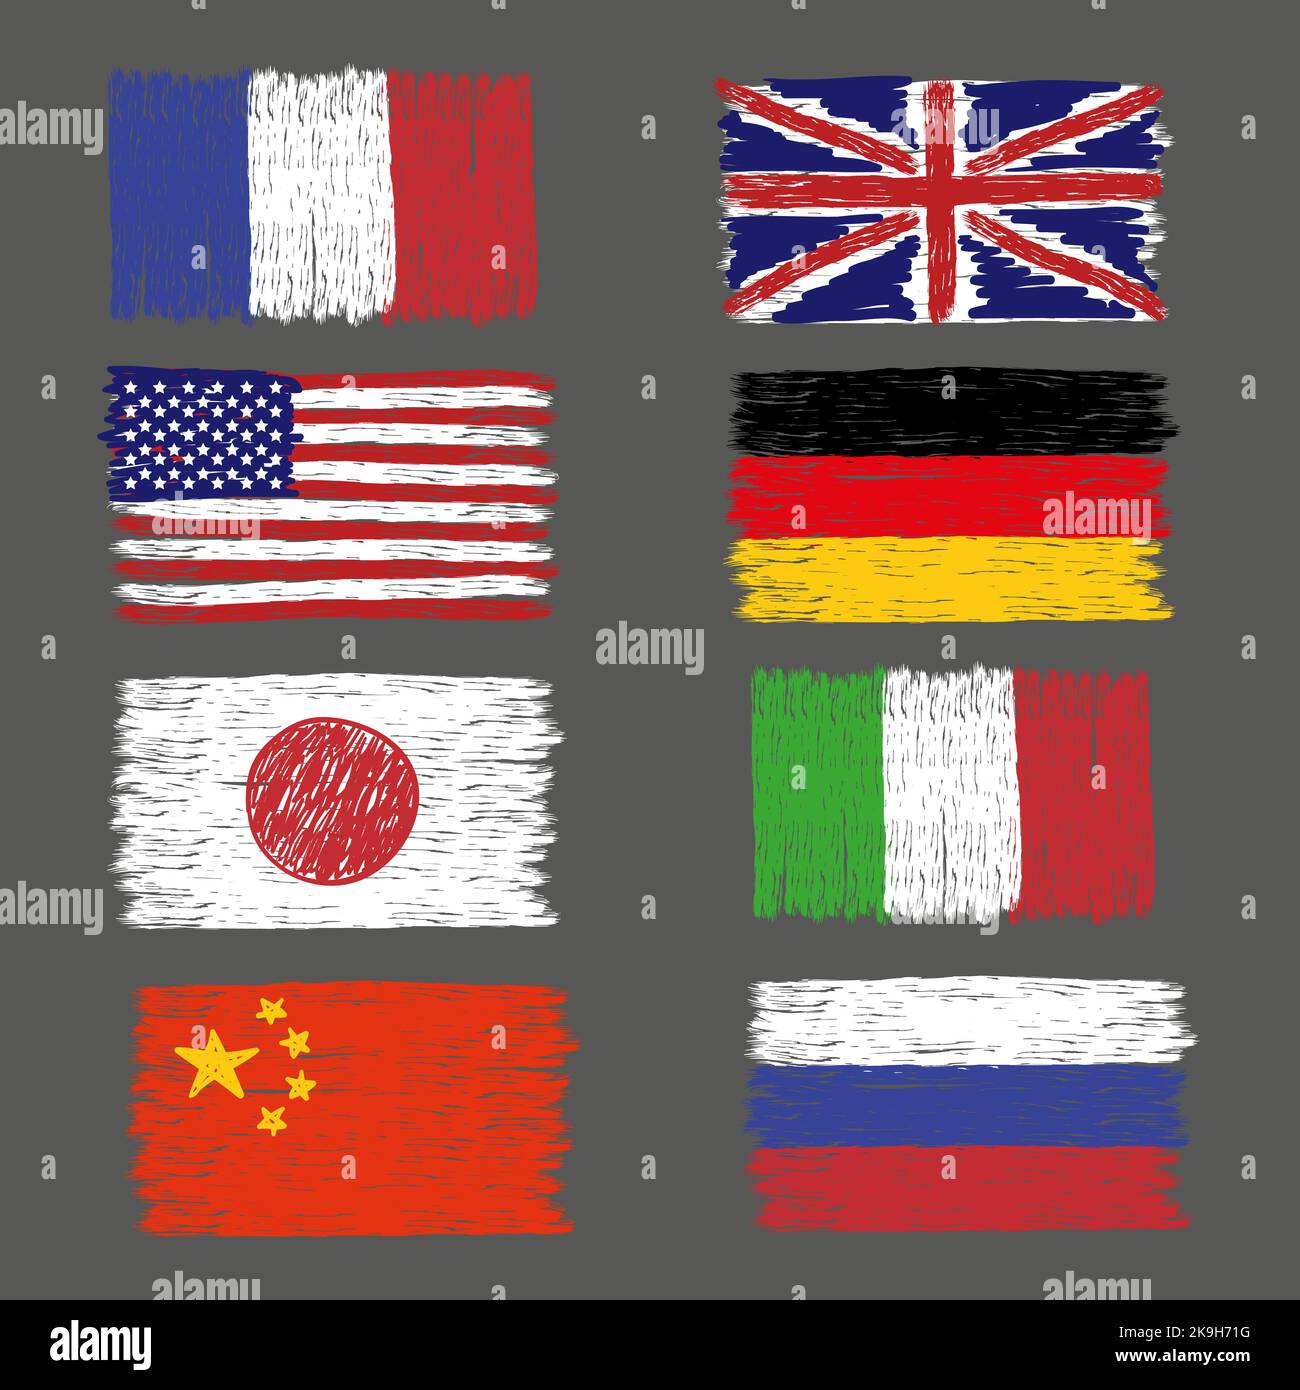 BANDERAS DE 190 PAISES DEL MUNDO (FLAGS OF THE WORLD 190 COUNTRIES in  Spanish language) Stock Vector